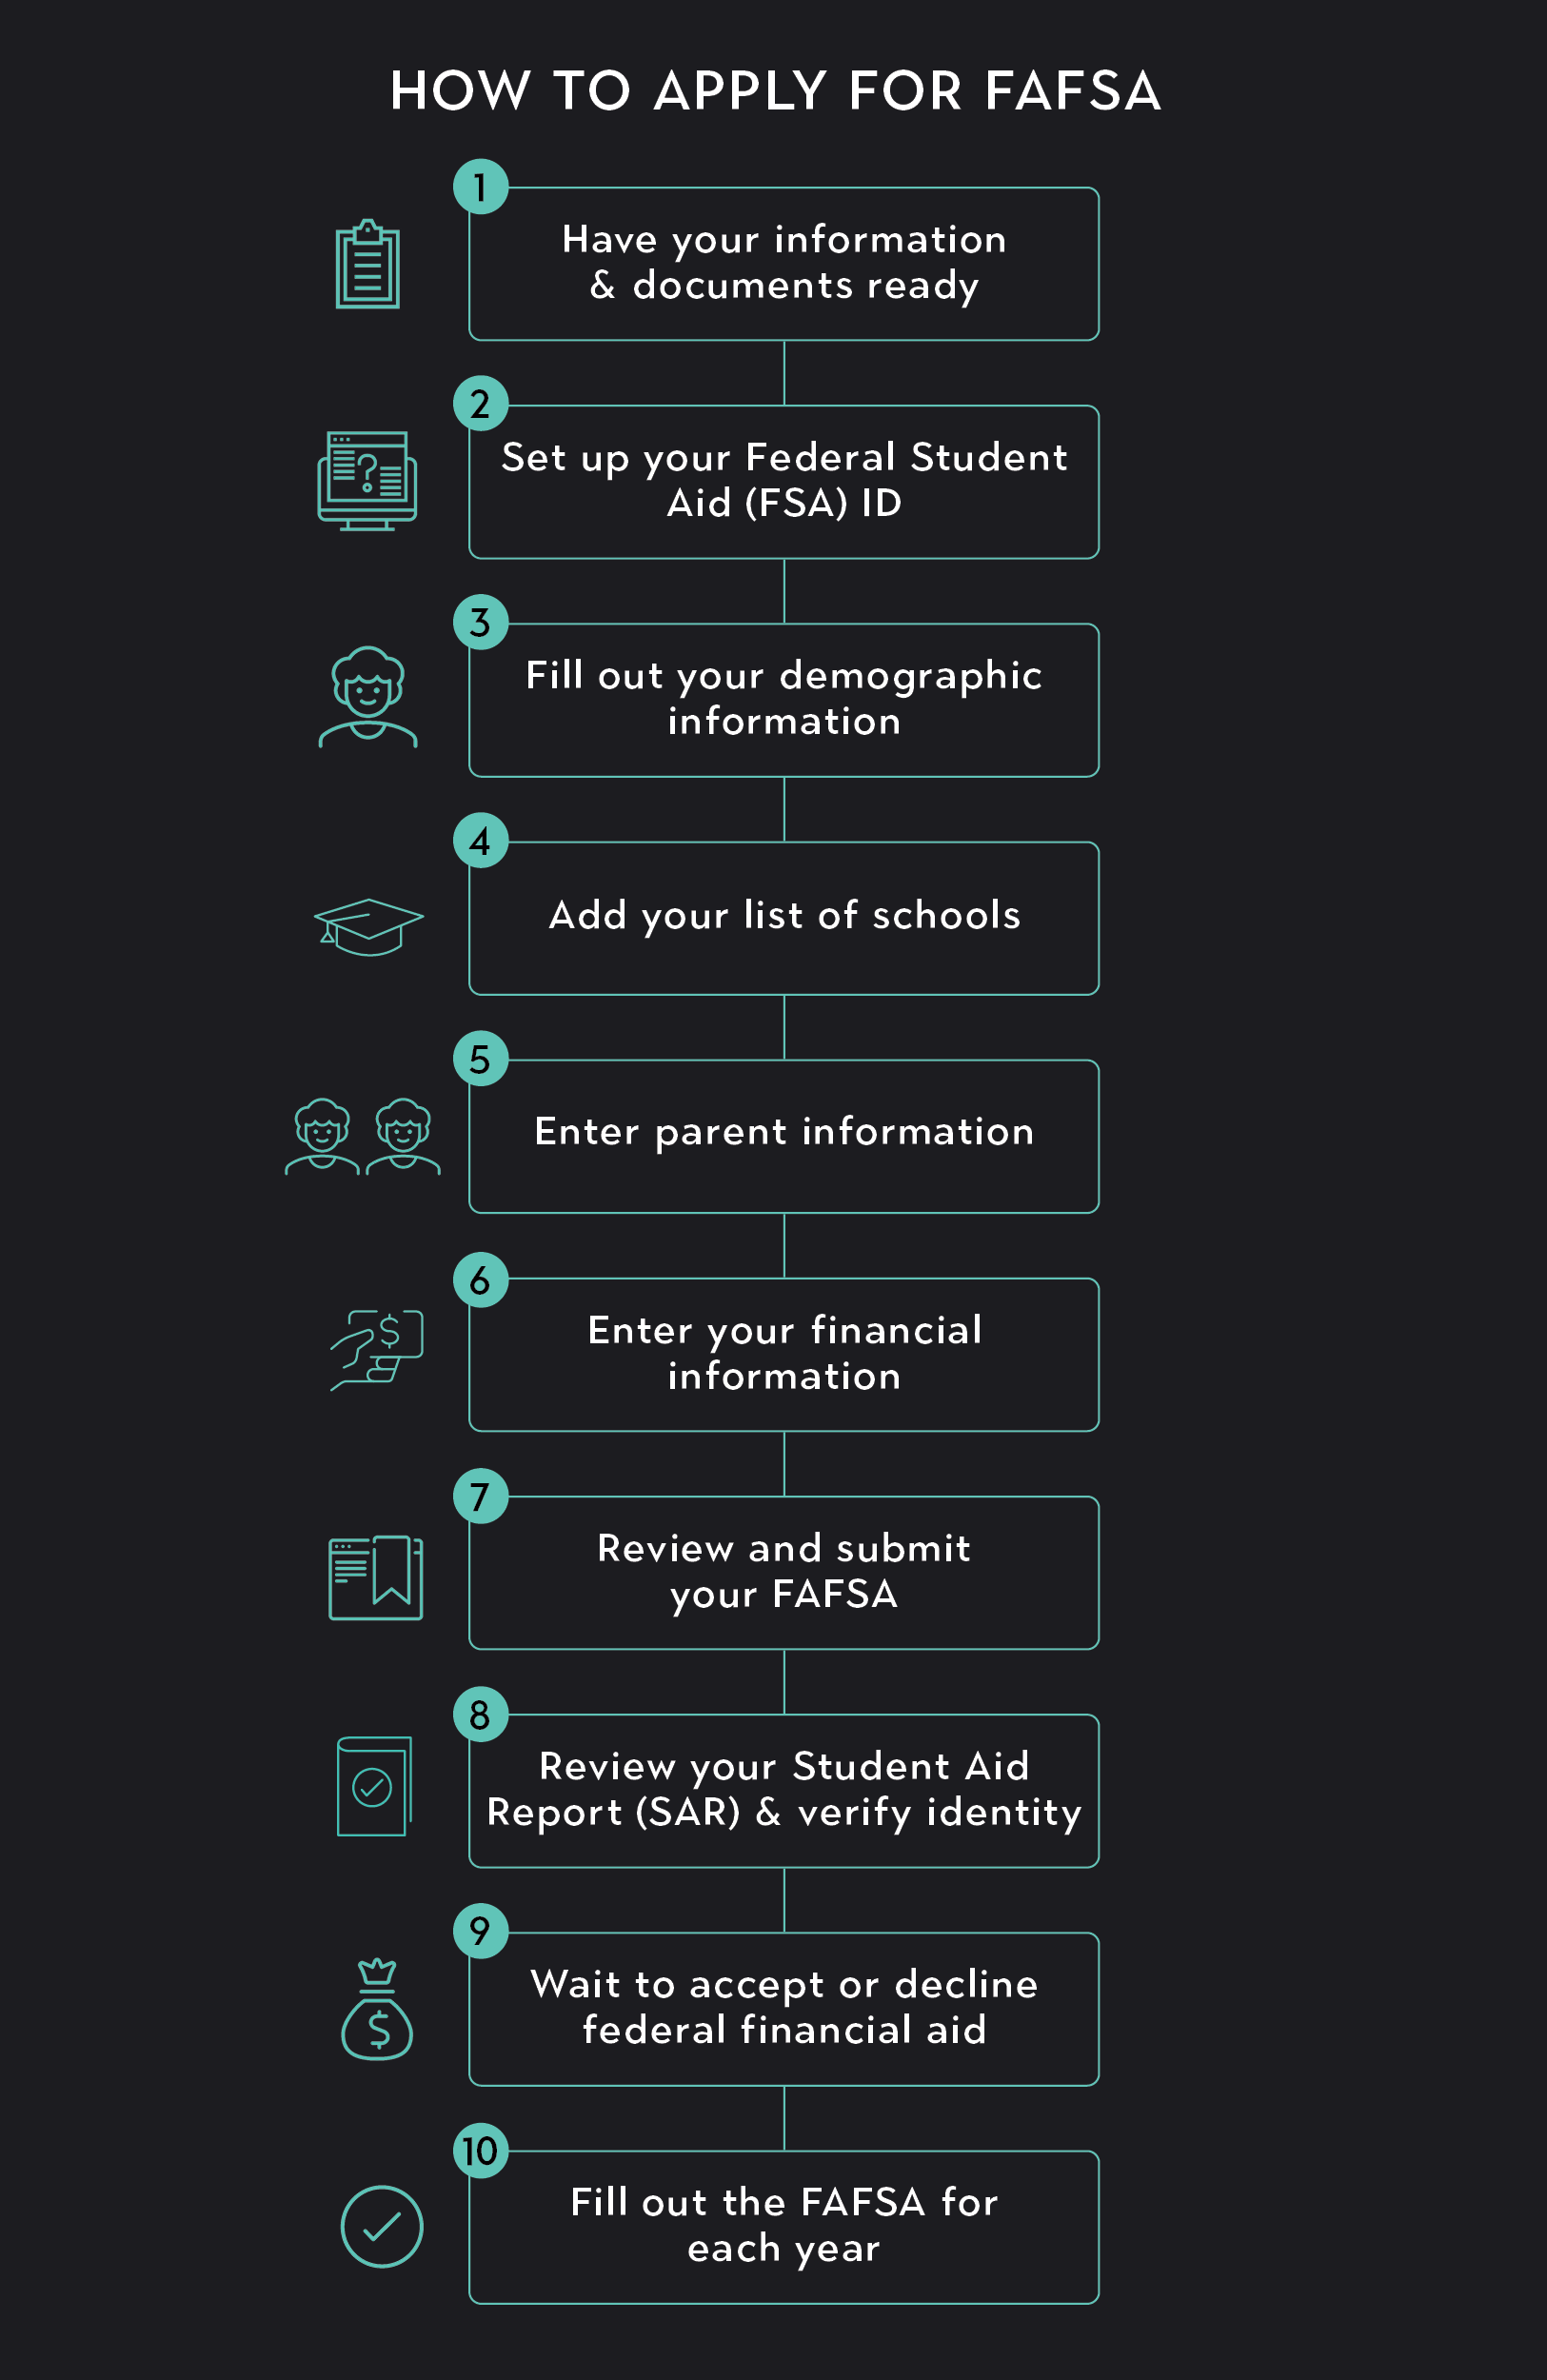 How to apply for FAFSA in 10 steps